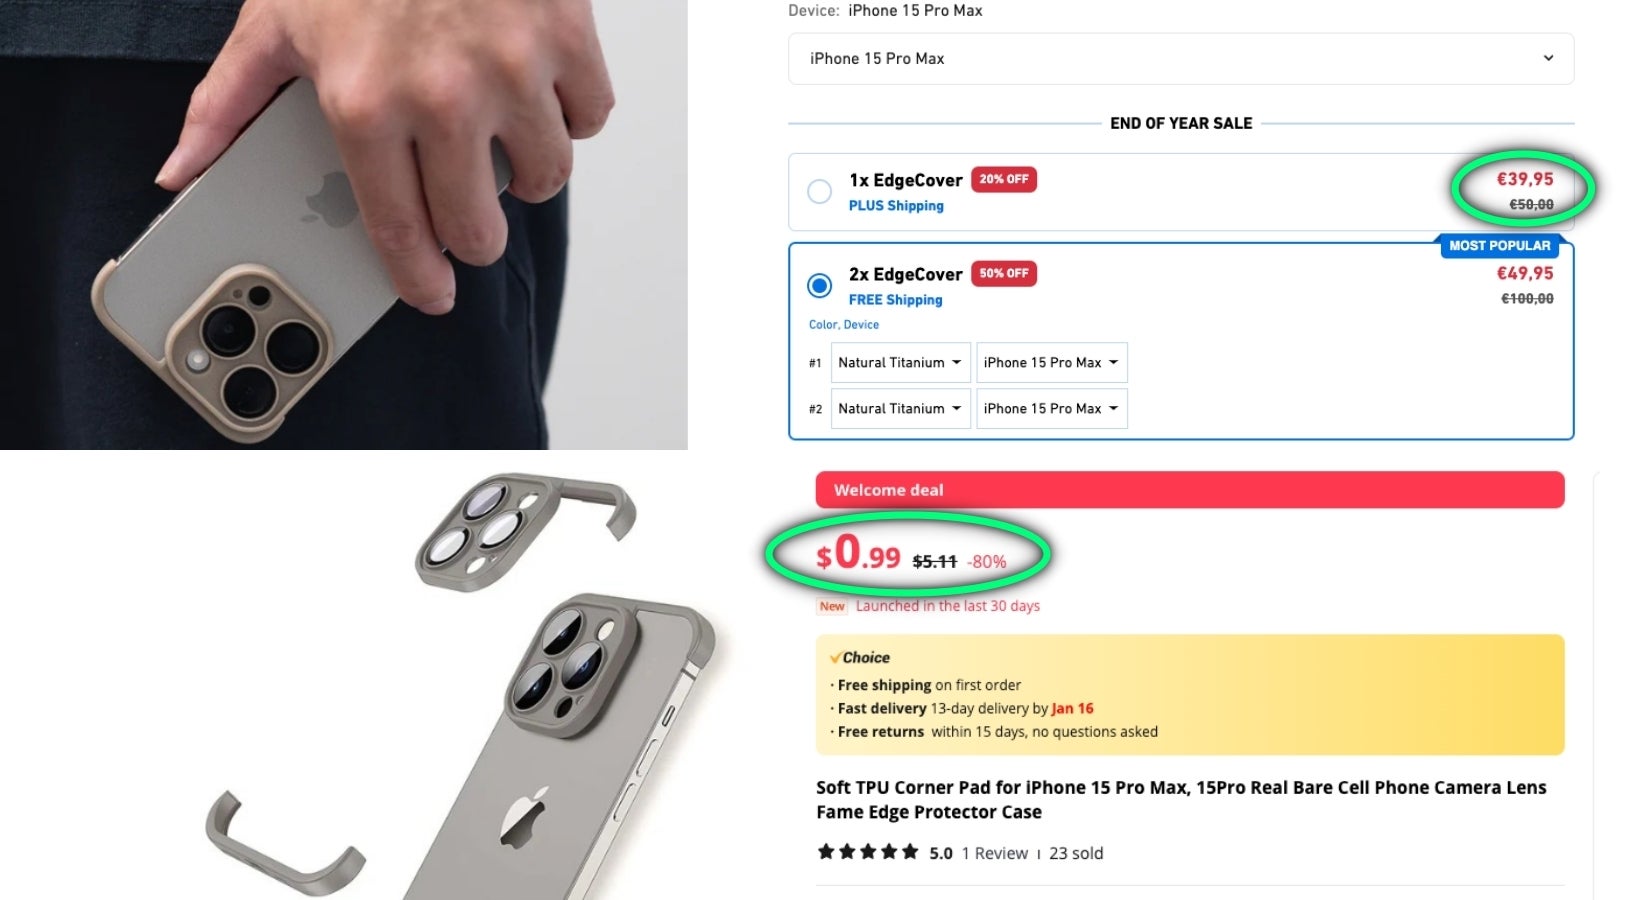 $50 versus $1 for the same iPhone bumper case?  - Hundreds of people are falling for this iPhone case scam: stop paying too much for iPhone accessories